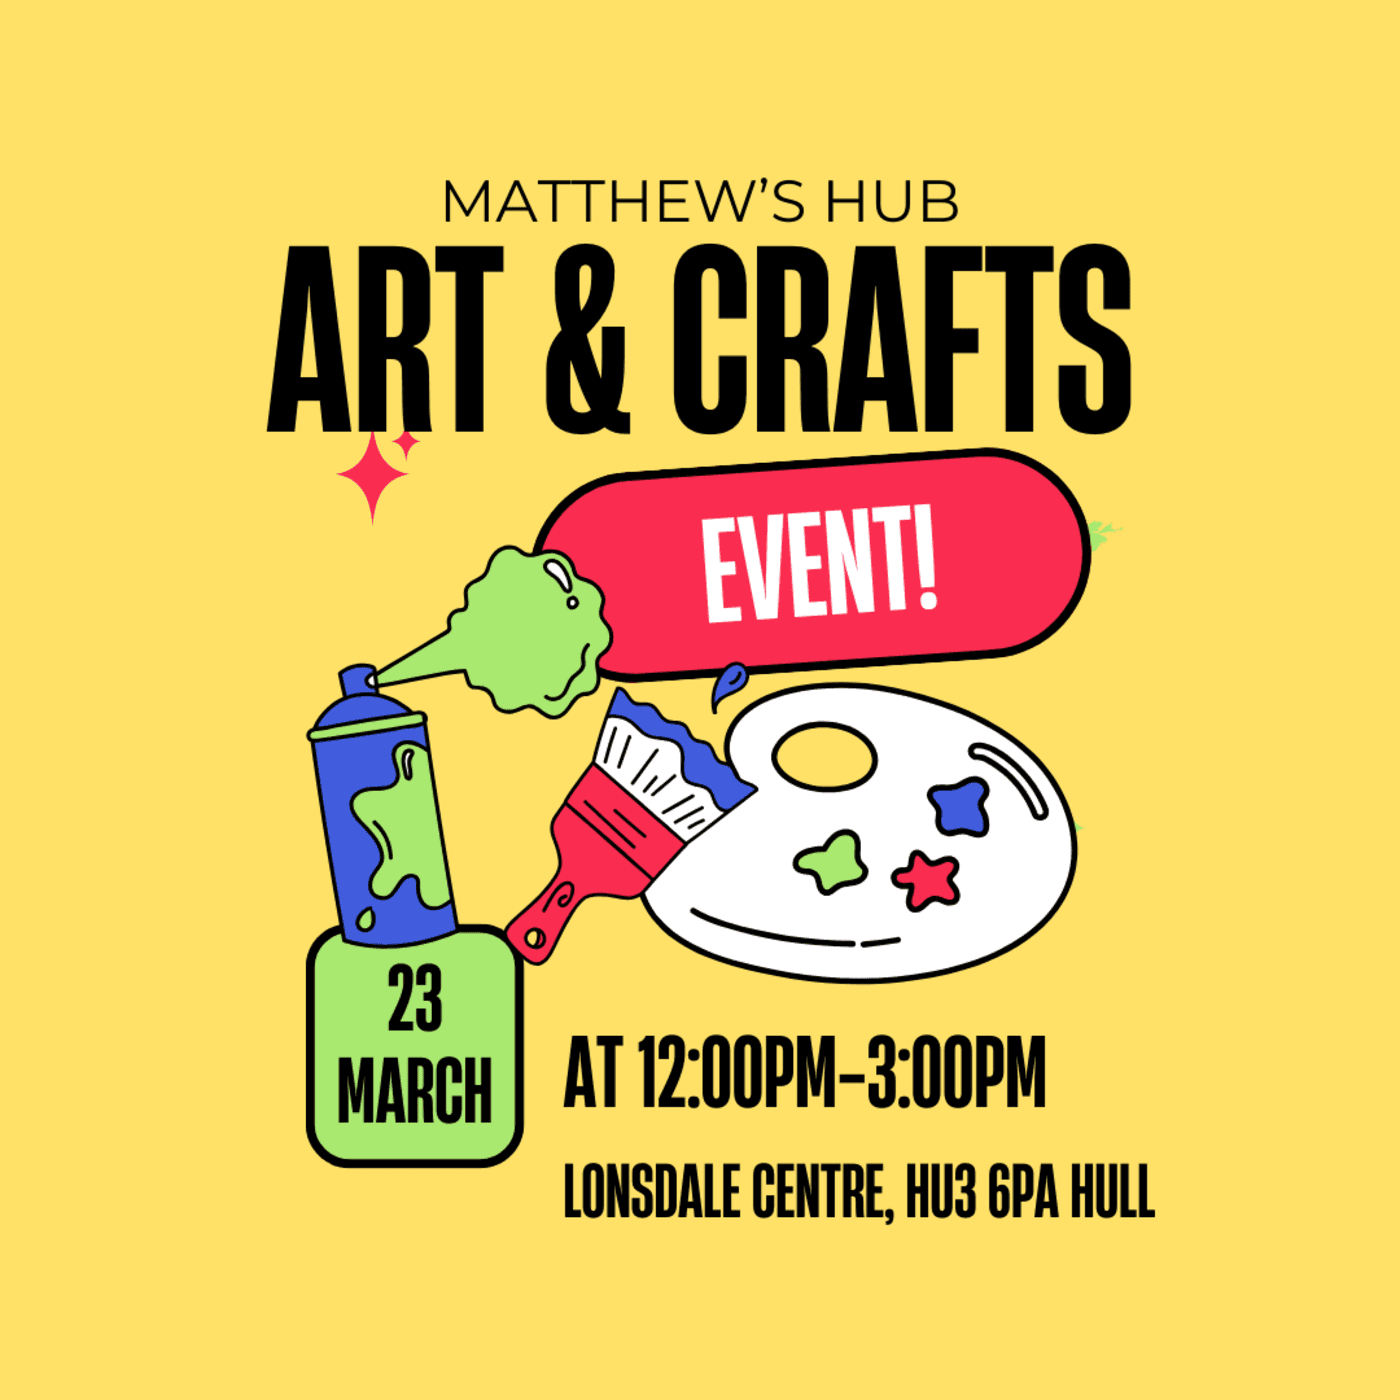 Join our Arts and Crafts event to celebrate the 10th anniversary of Matthew’s Hub